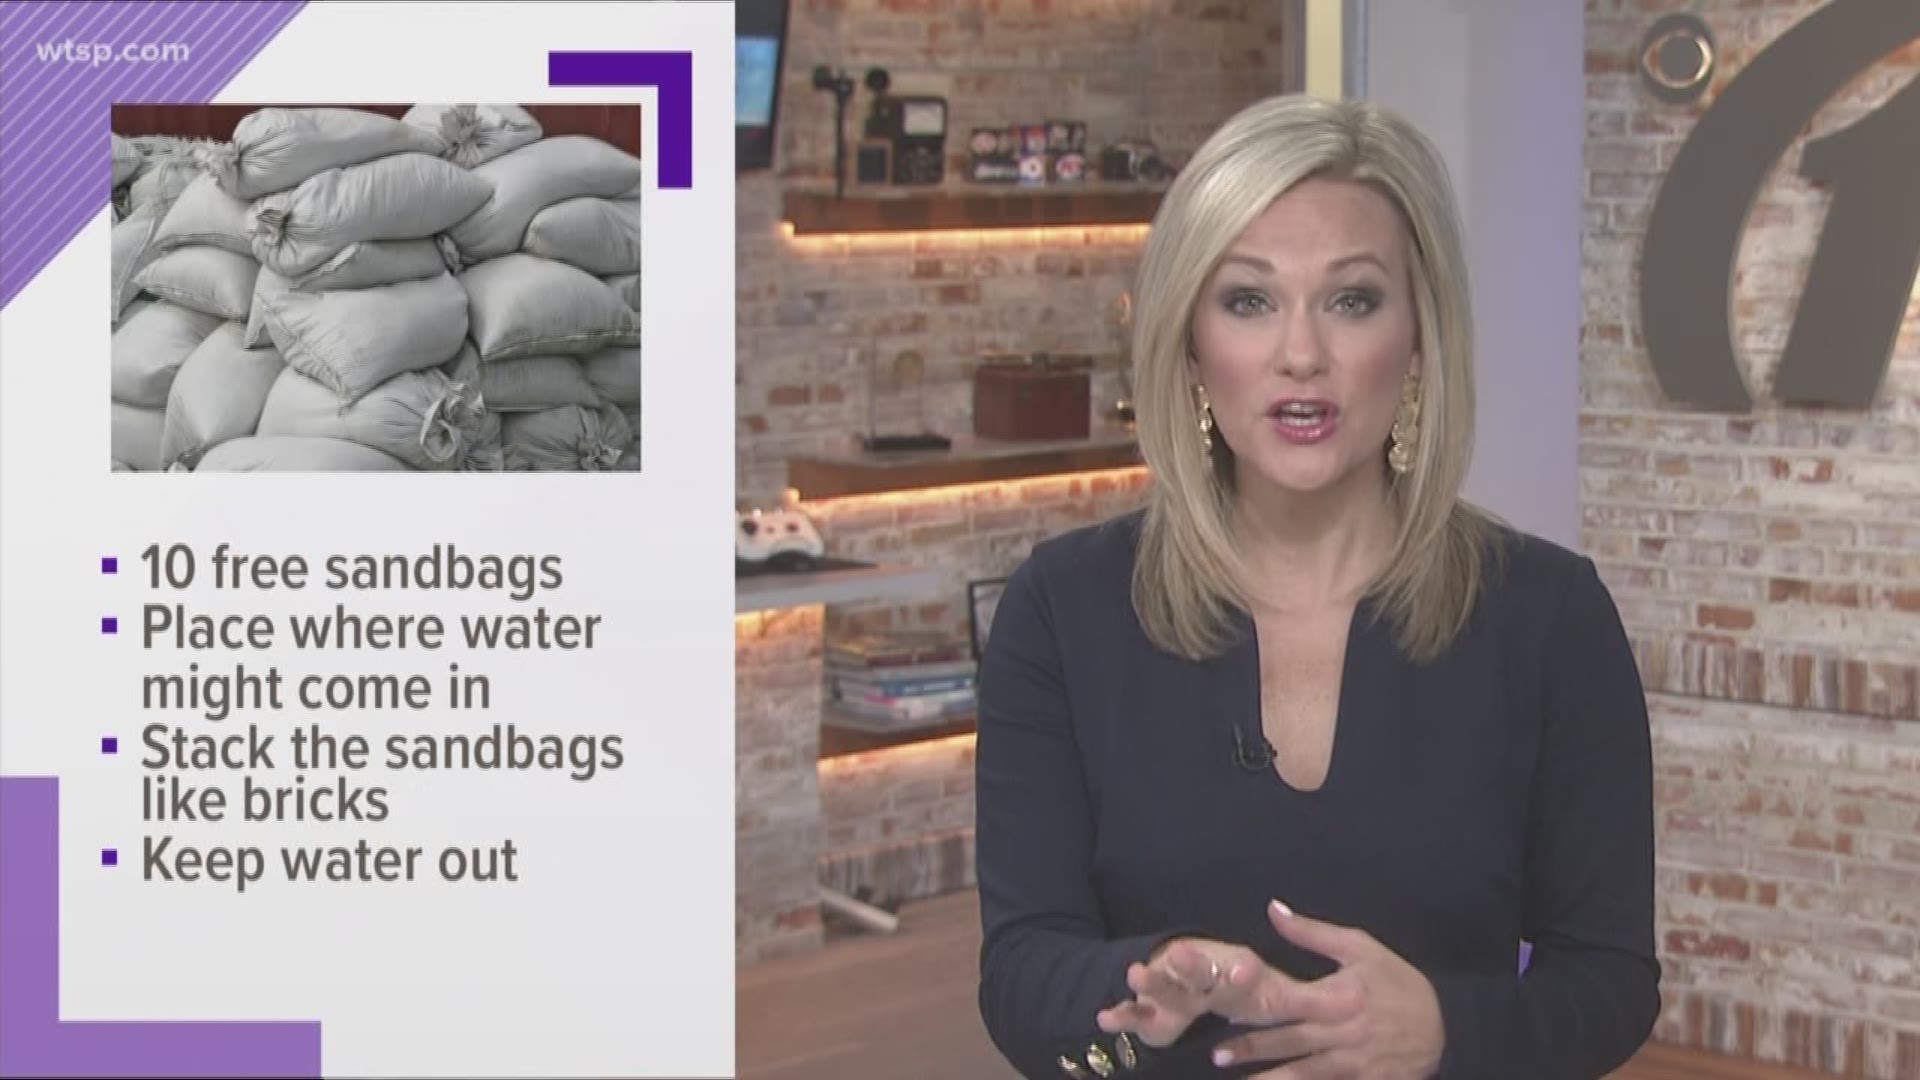 Sandbags are a helpful tool in preventing your home from flooding. https://on.wtsp.com/2Ug1oAr